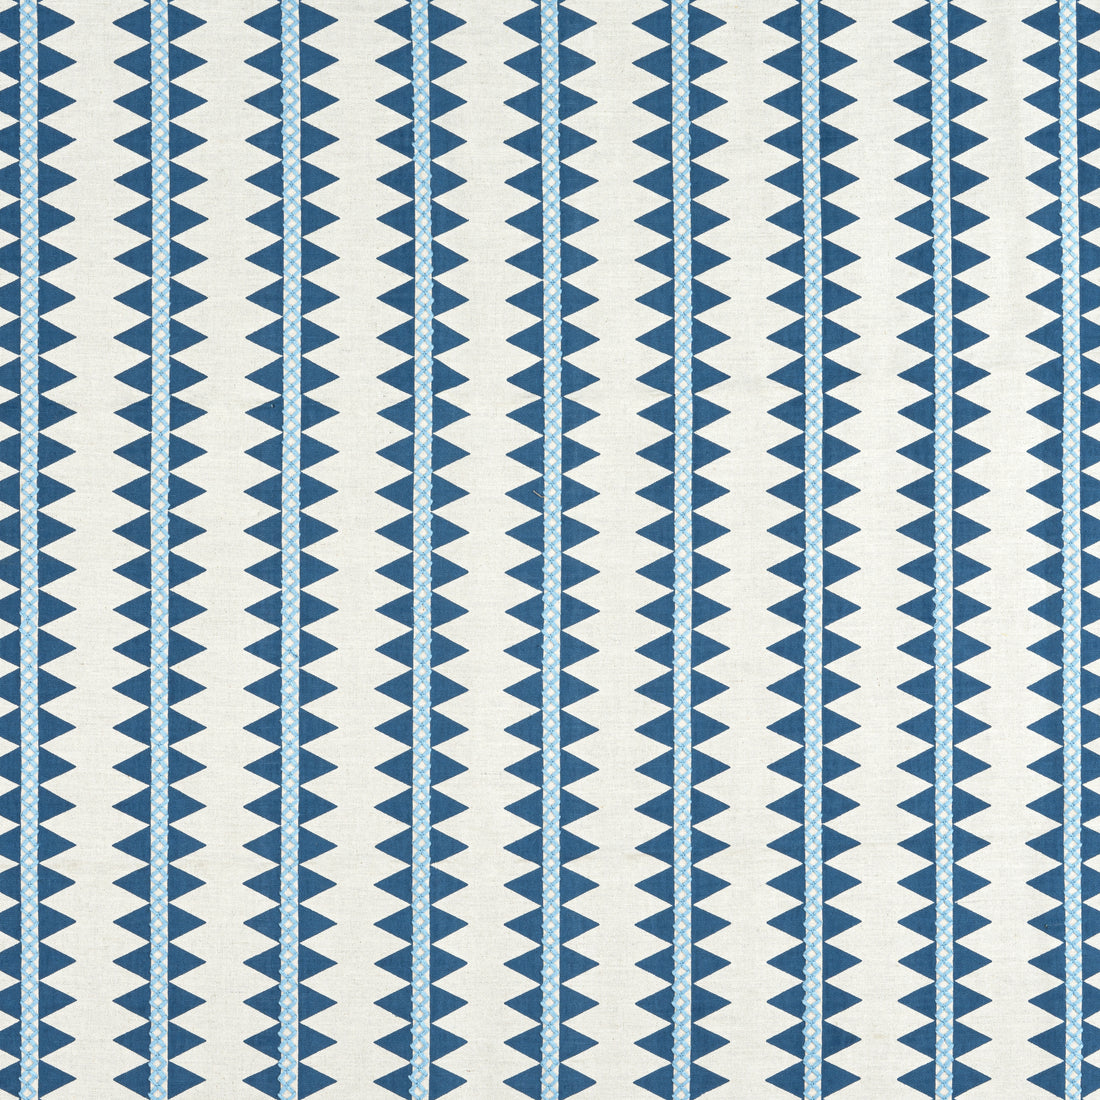 Reno Stripe Embroidery fabric in navy color - pattern number W713244 - by Thibaut in the Mesa Fabrics collection